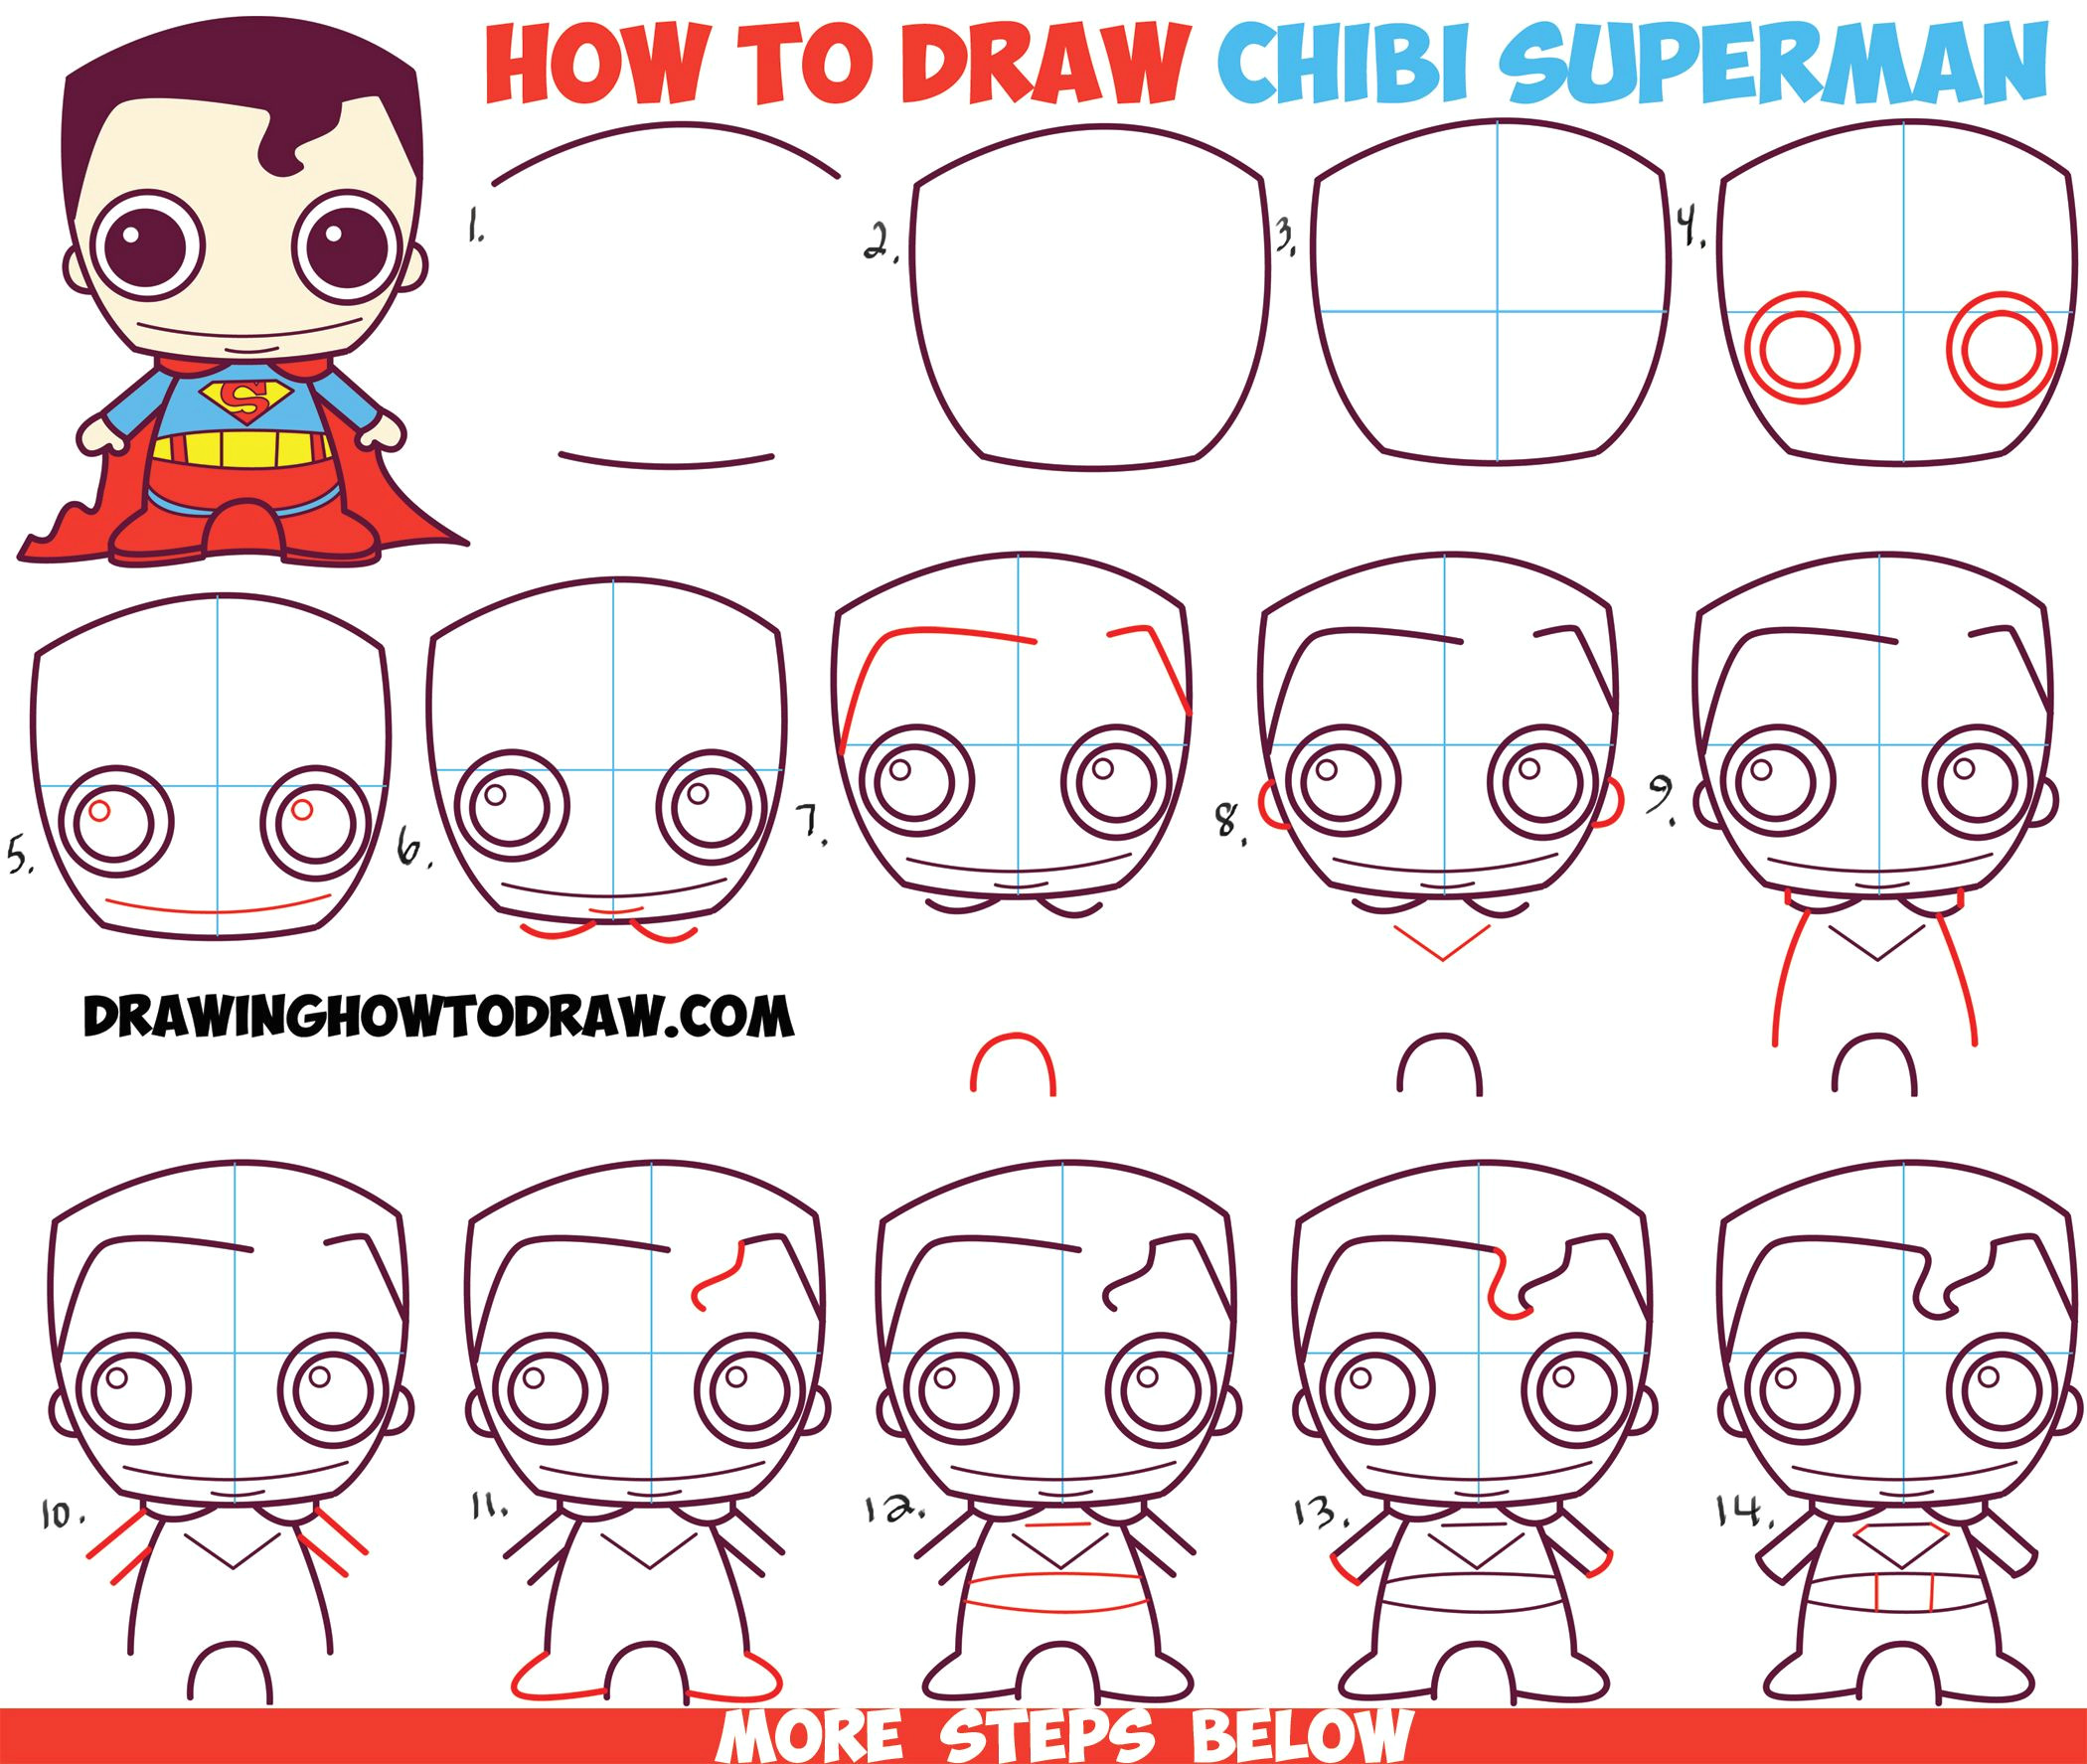 Anime Drawing Tutorials for Beginners Step by Step How to Draw Cute Chibi Superman From Dc Comics In Easy Step